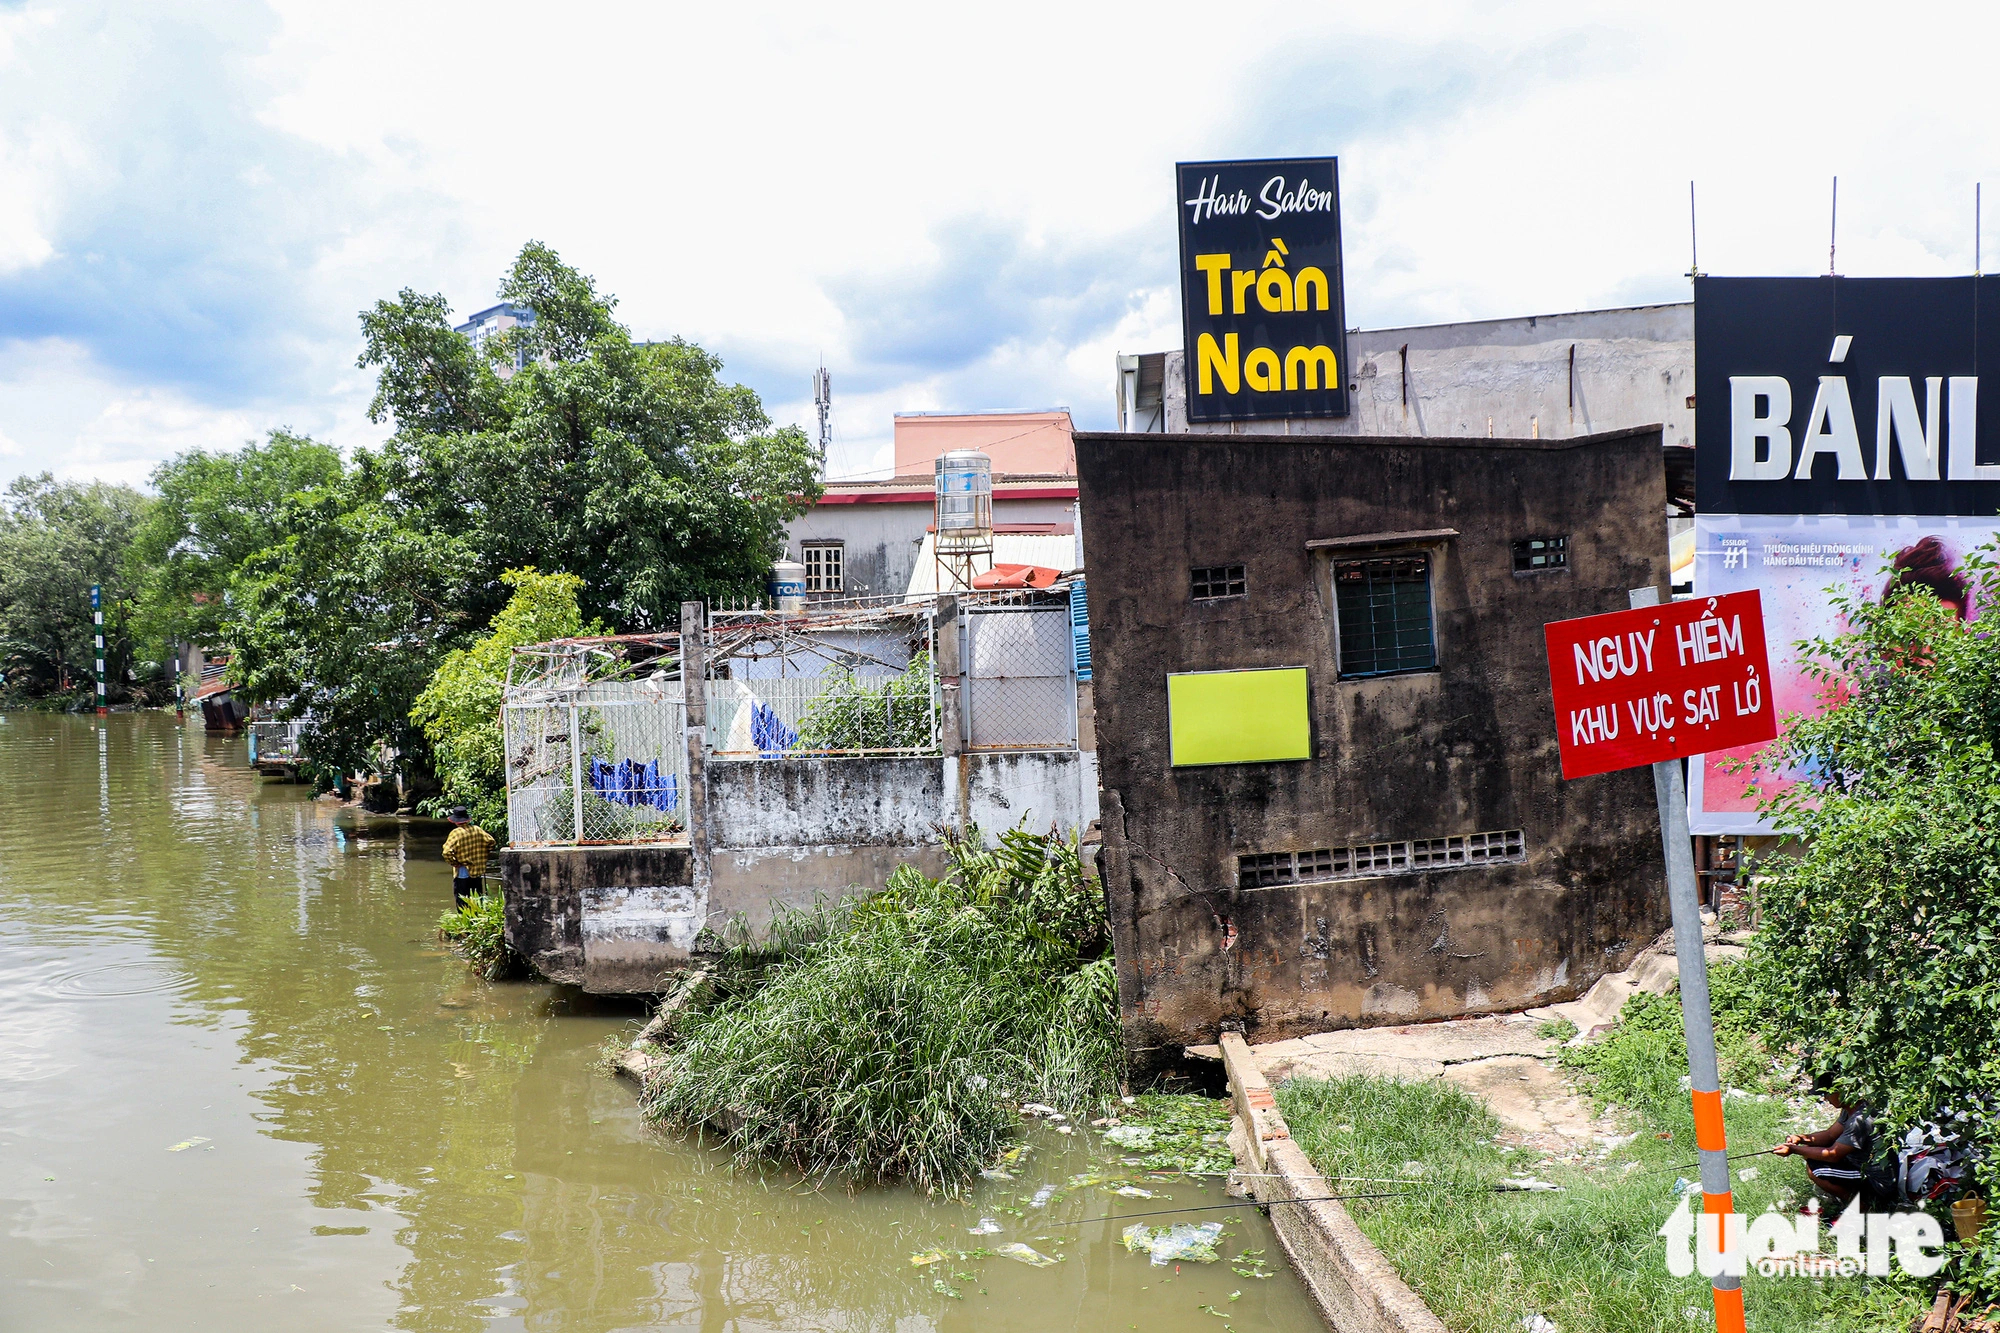 Many houses encroach on the erosion-hit Giong Ong To canal in Thu Duc City on June 29, 2023. Photo: Chau Tuan / Tuoi Tre